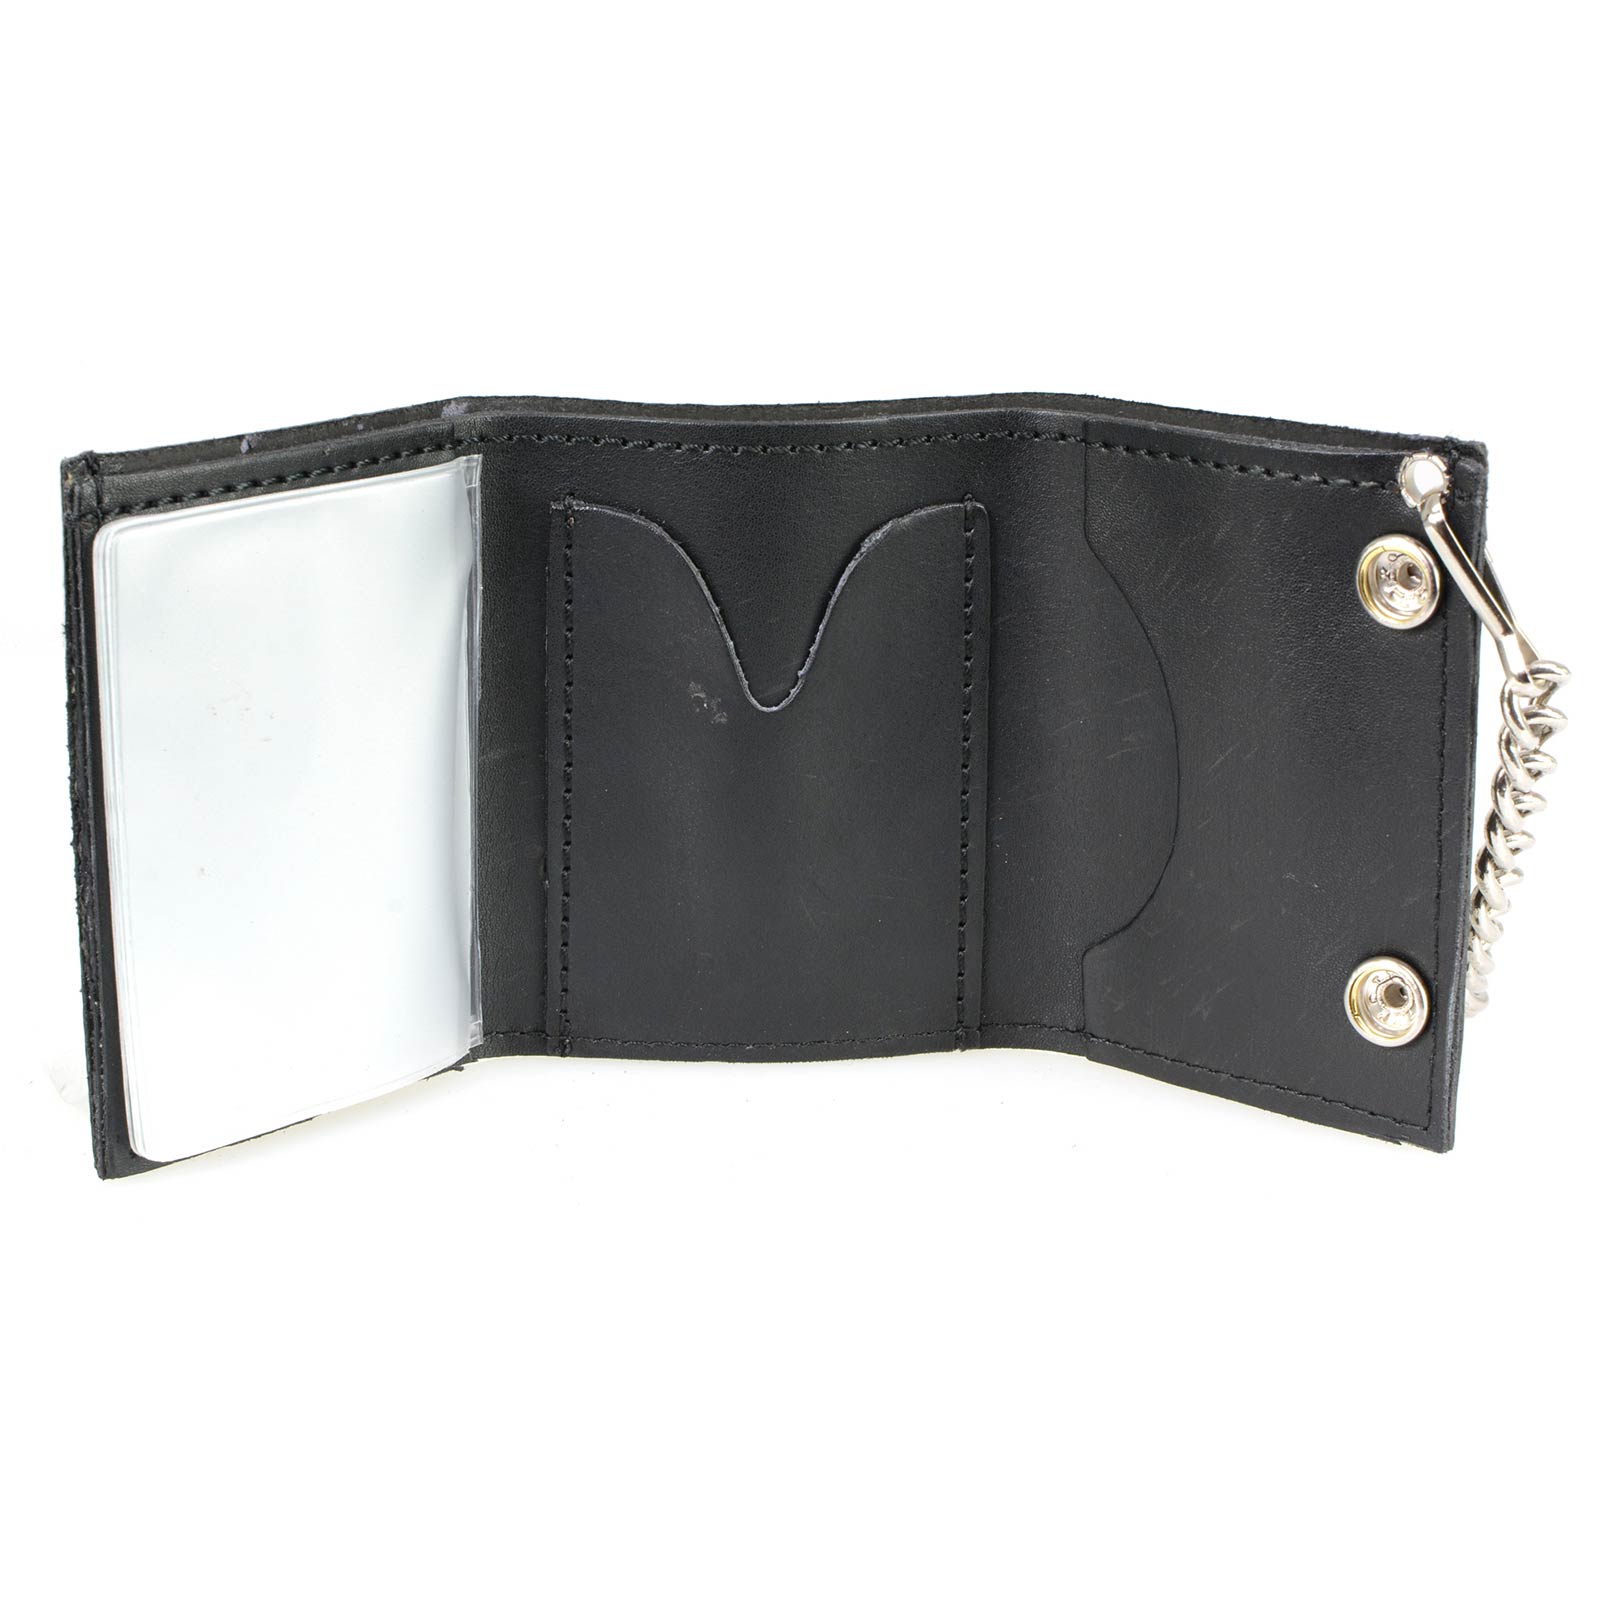 Milwaukee Leather MLW7836 Men's 4” Leather “Triple Skull” Tri-Fold Wallet w/ Anti-Theft Stainless Steel Chain